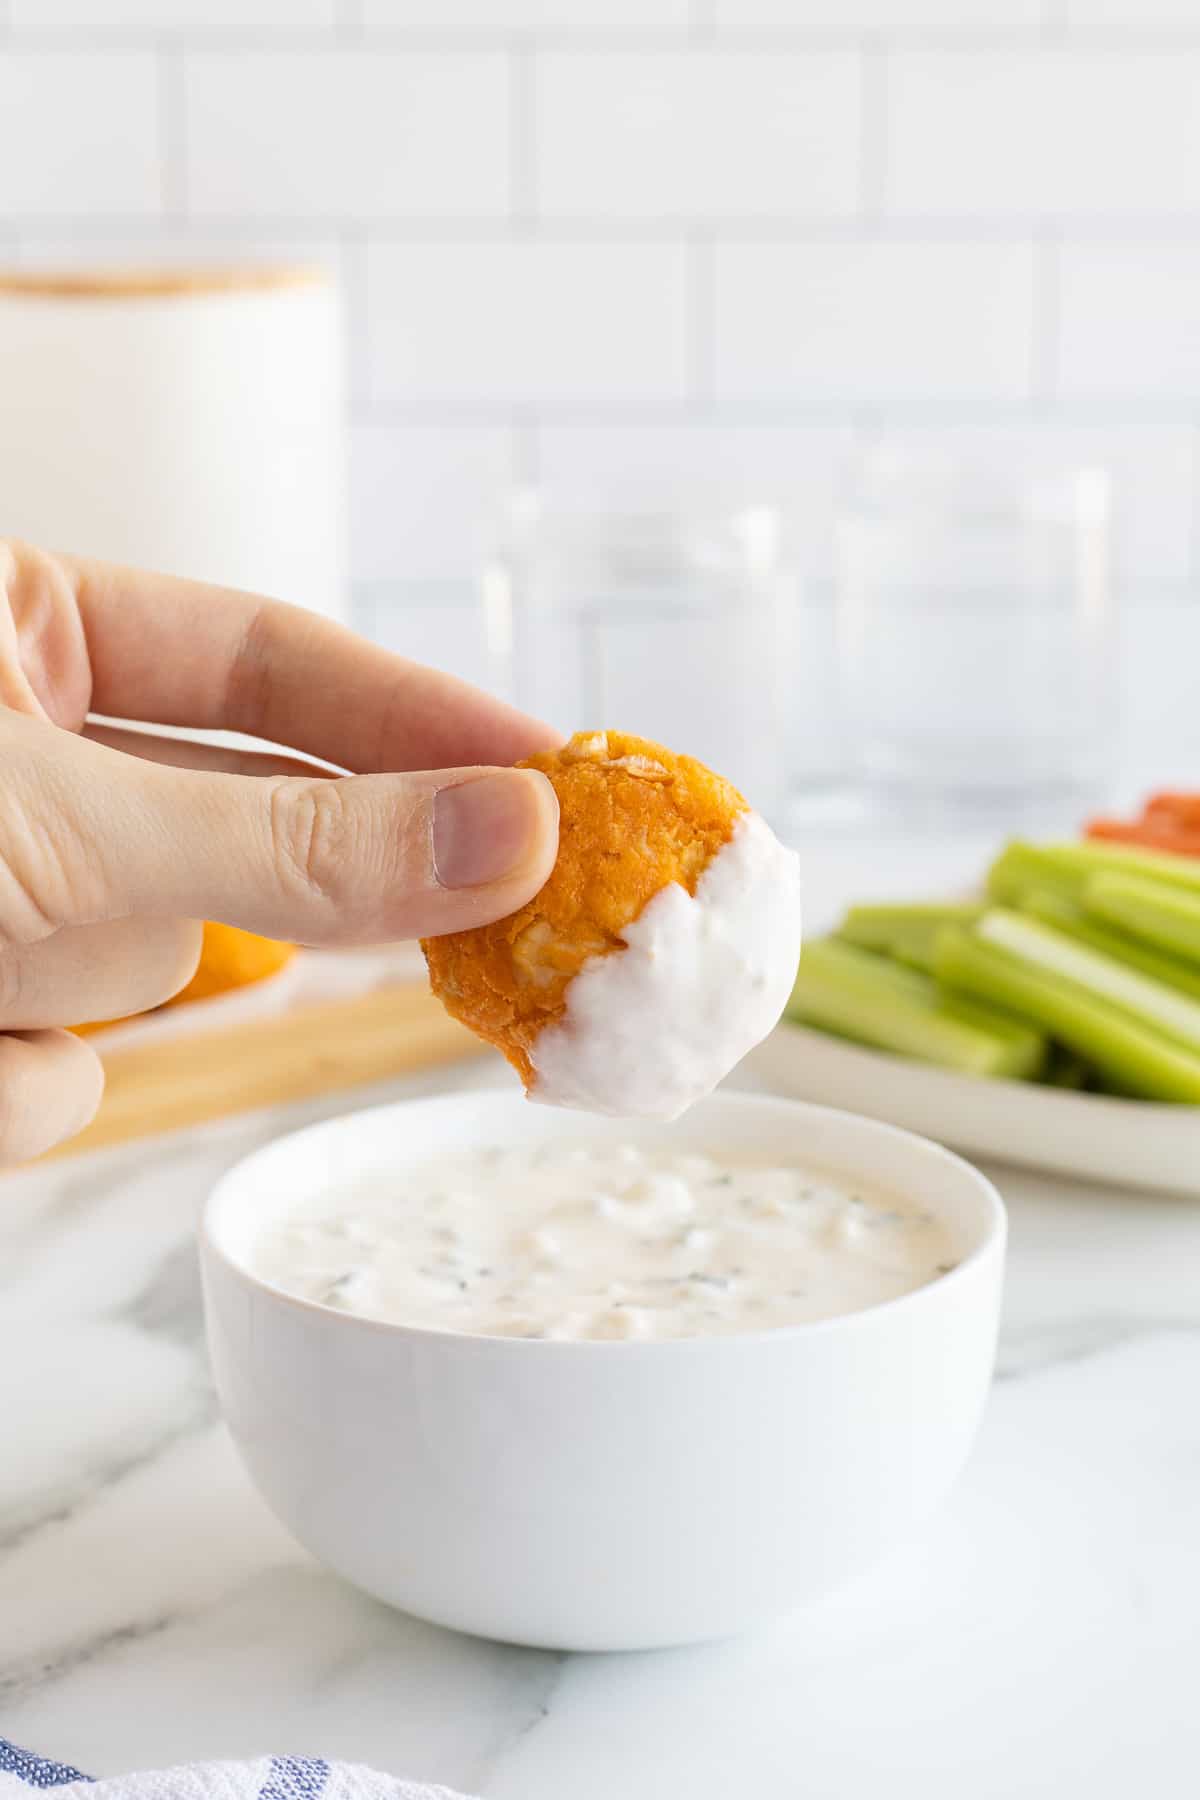 A hand holding a buffalo chicken bite that has been dipped in blue cheese sauce.